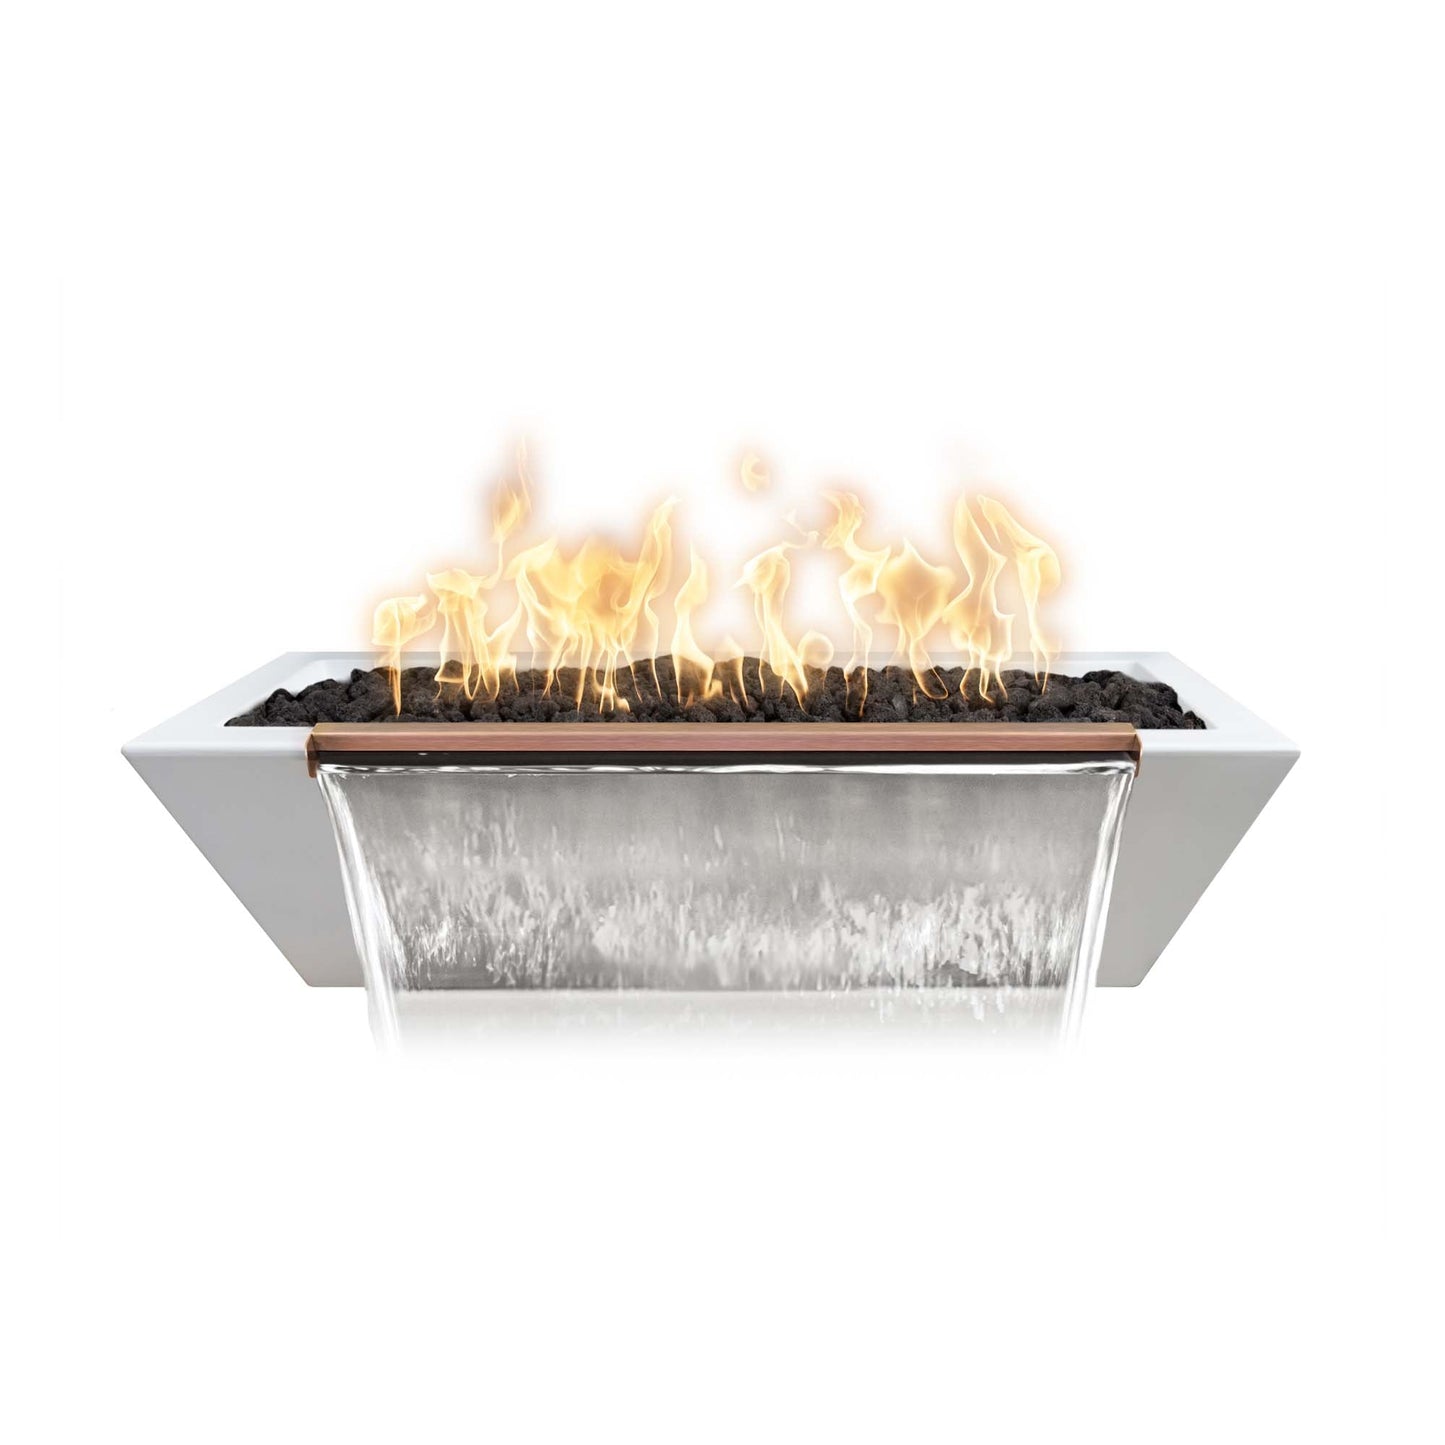 The Outdoor Plus Linear Maya 72" Rustic Gray GFRC Concrete Liquid Propane Fire & Water Bowl with Match Lit with Flame Sense Ignition